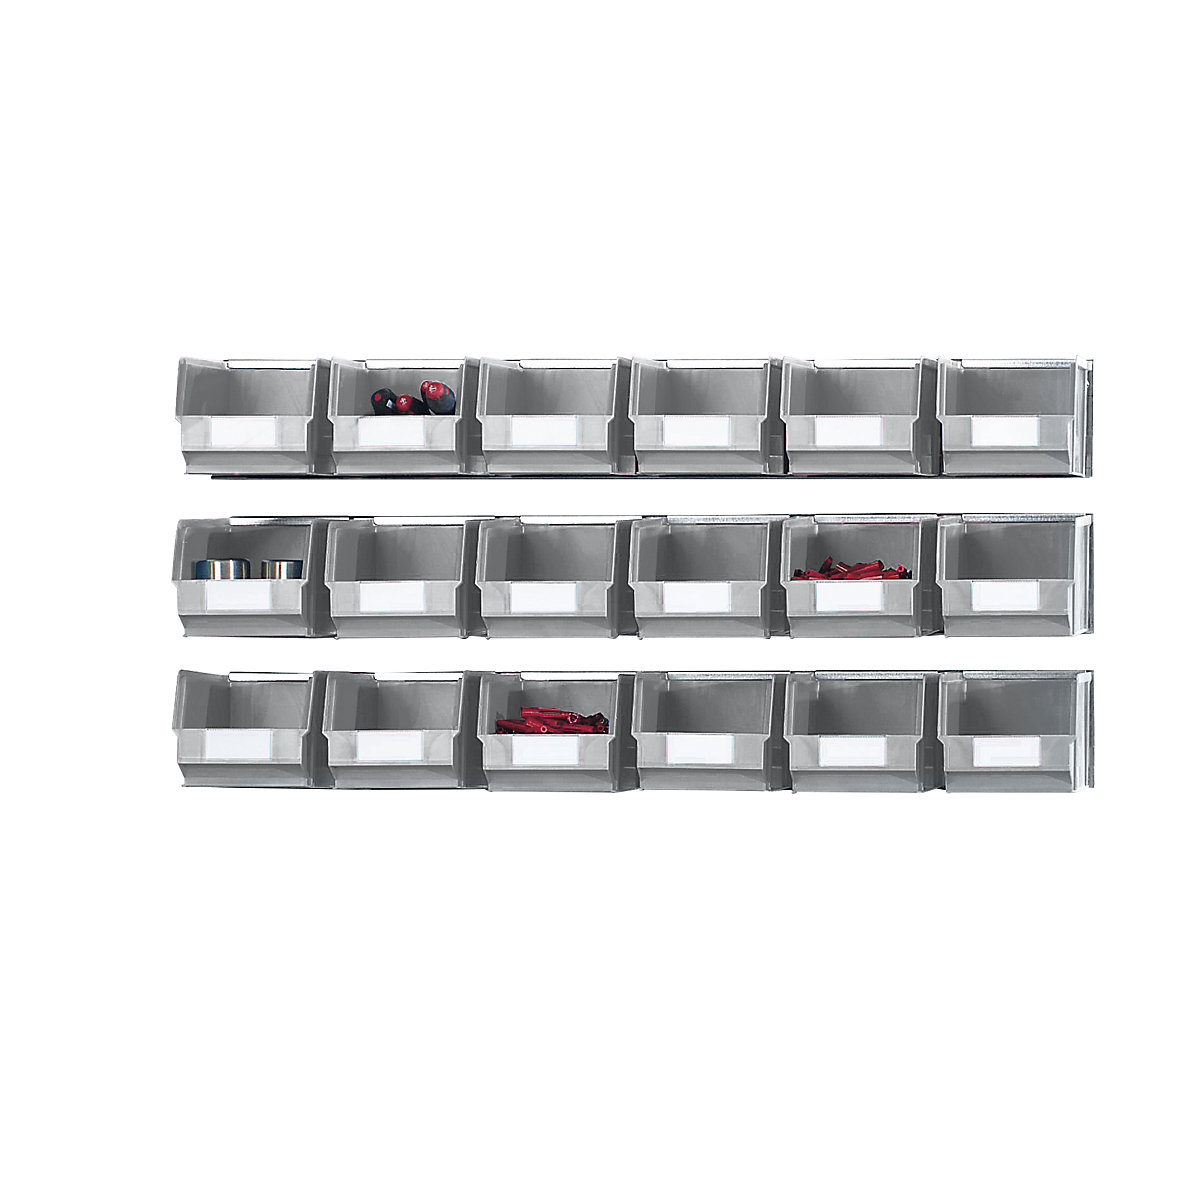 Set of suspension rails with open fronted storage bins